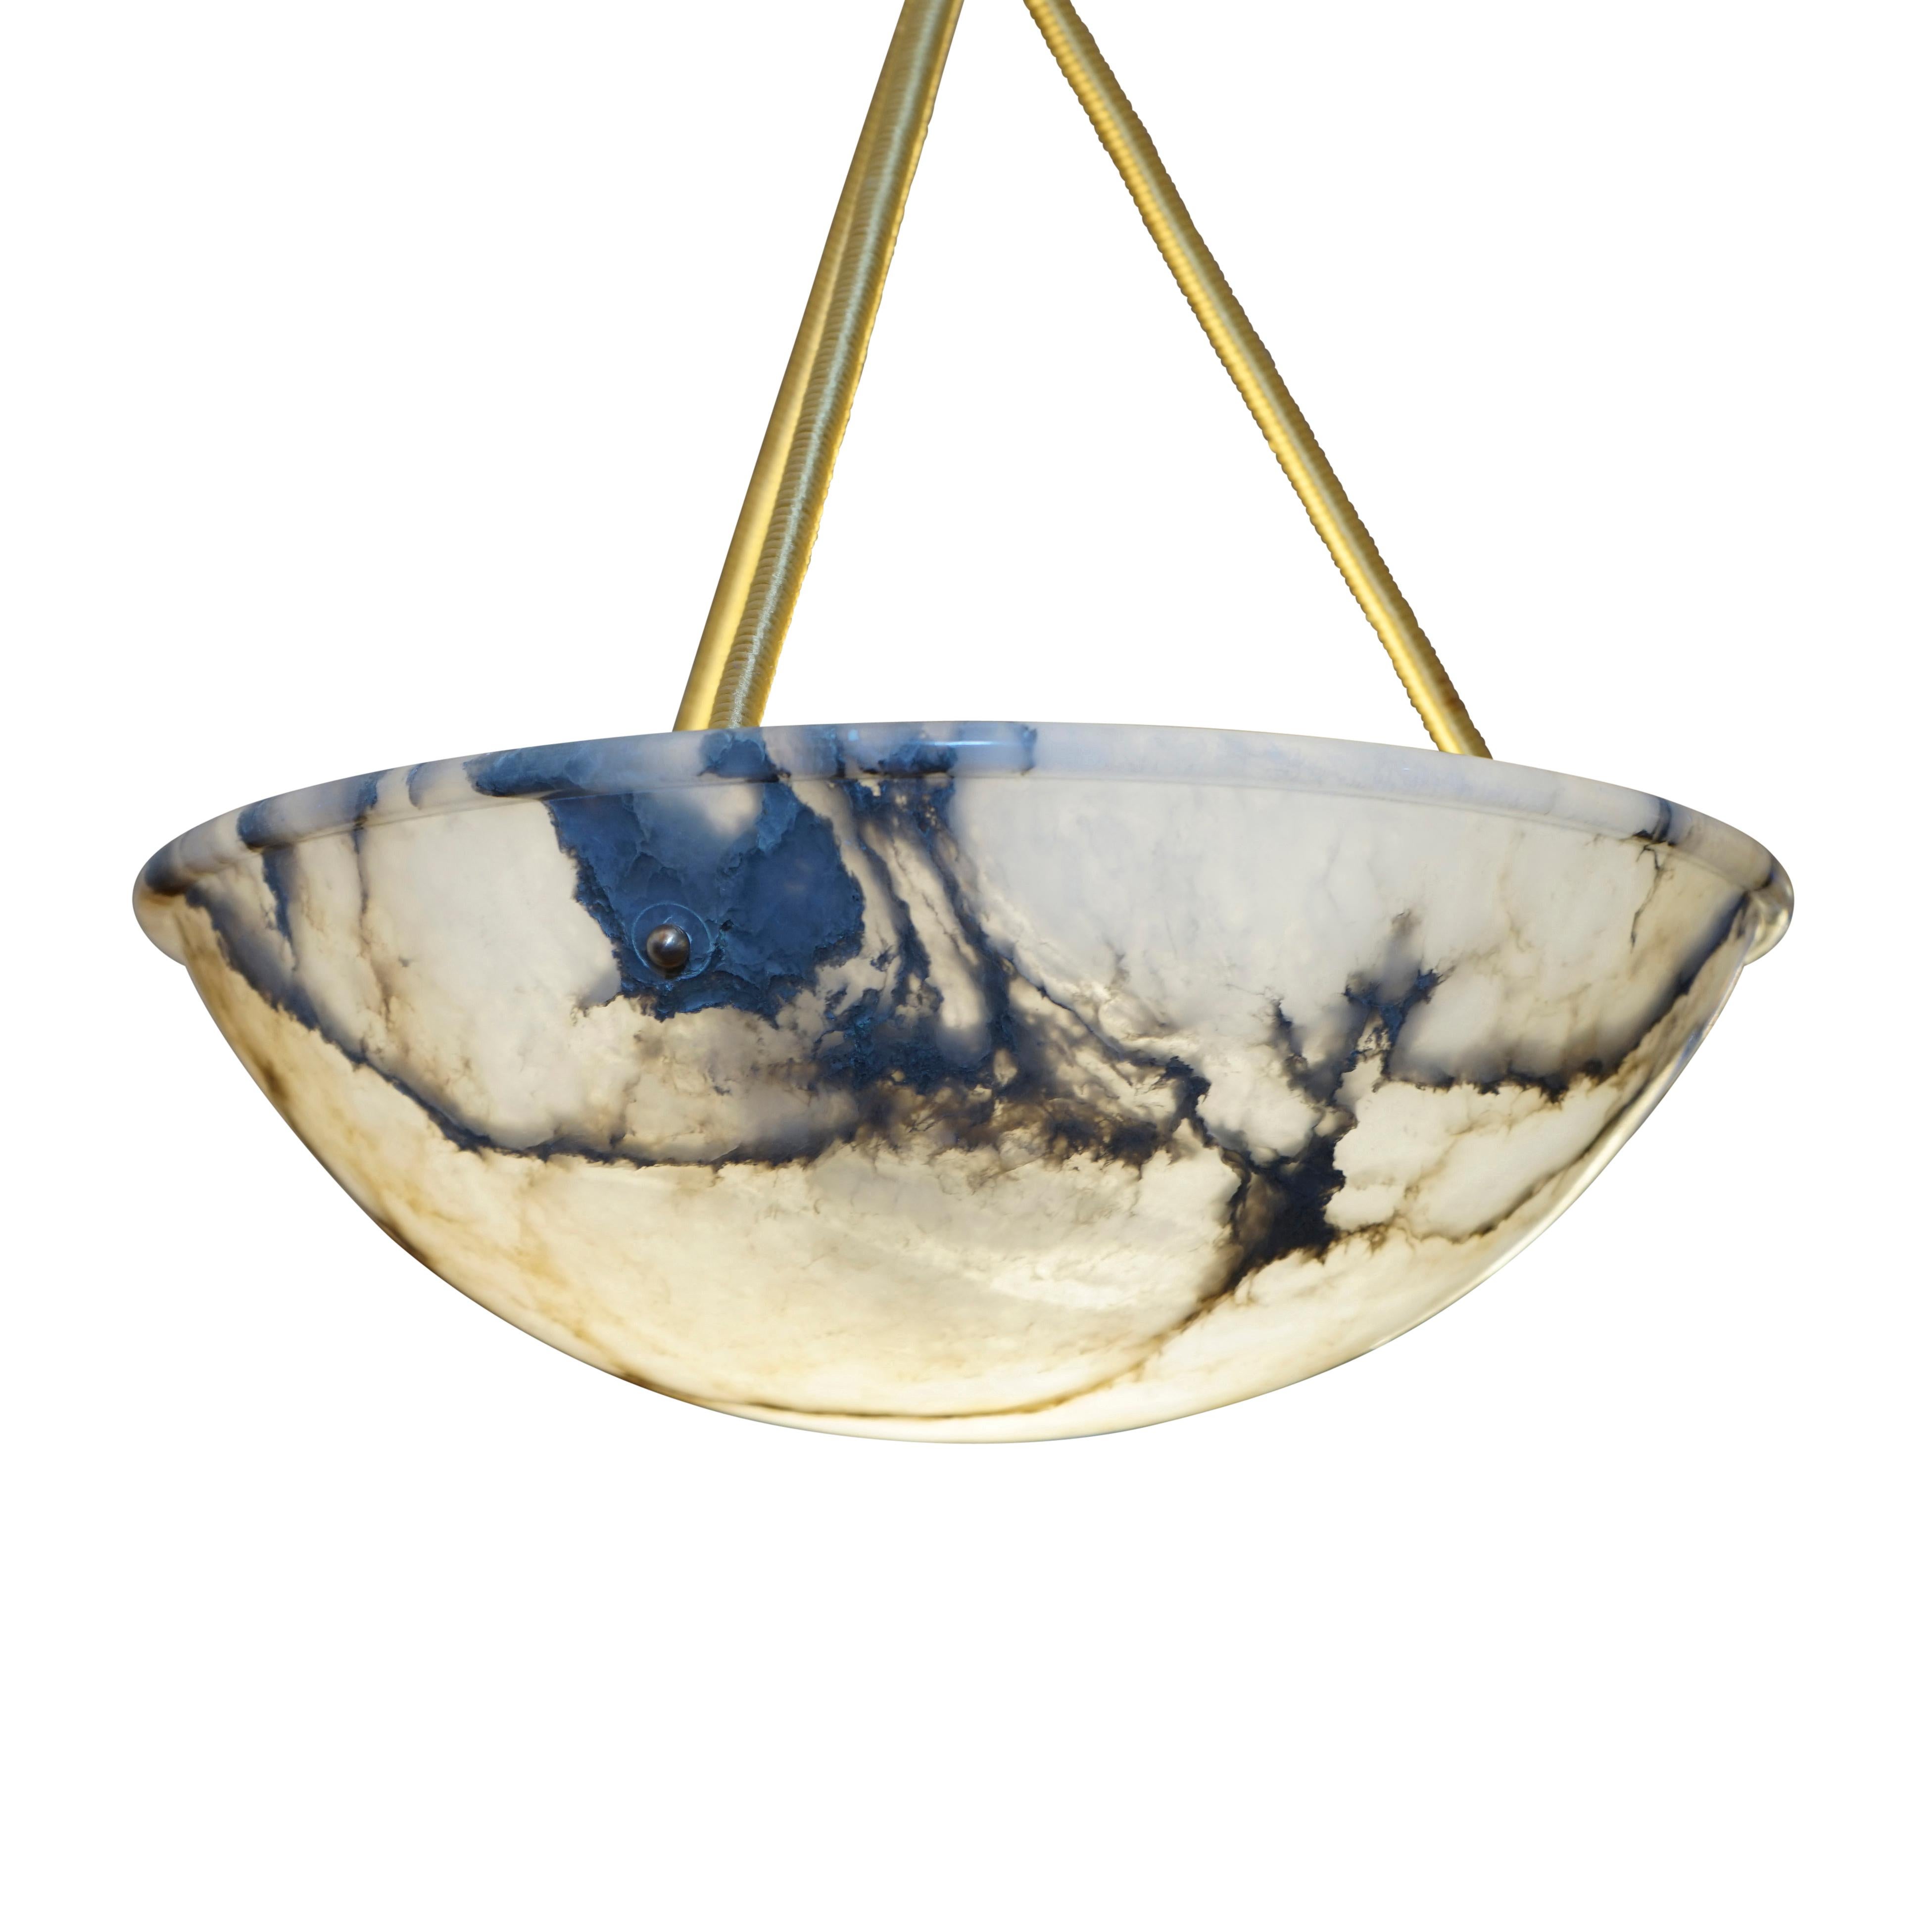 A pure example of a Classic Swedish design with a defined, singular upper rim and brilliant mineral veined alabaster streaked with crystal. This type of lighting was sleek and typified the new century's fascination with the recently perfected use of